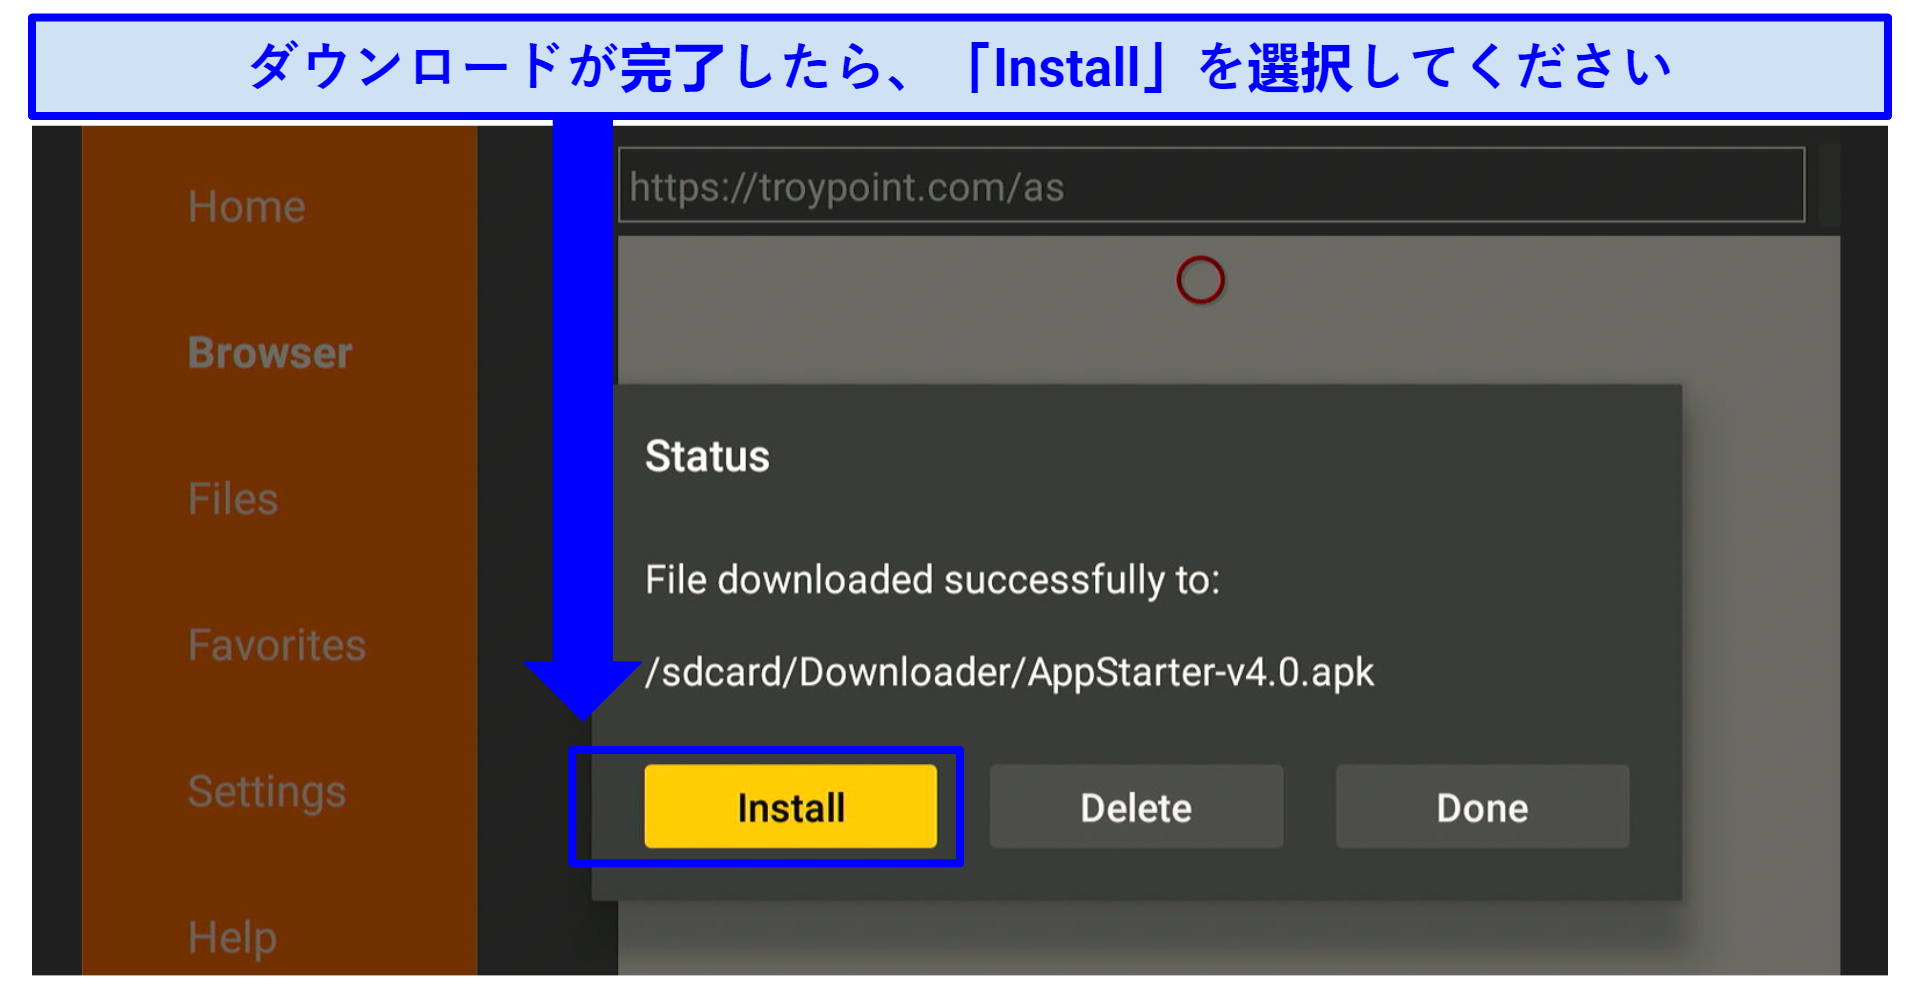 A screenshot showing it's easy to install AppStarter on Firestick with the Downloader app